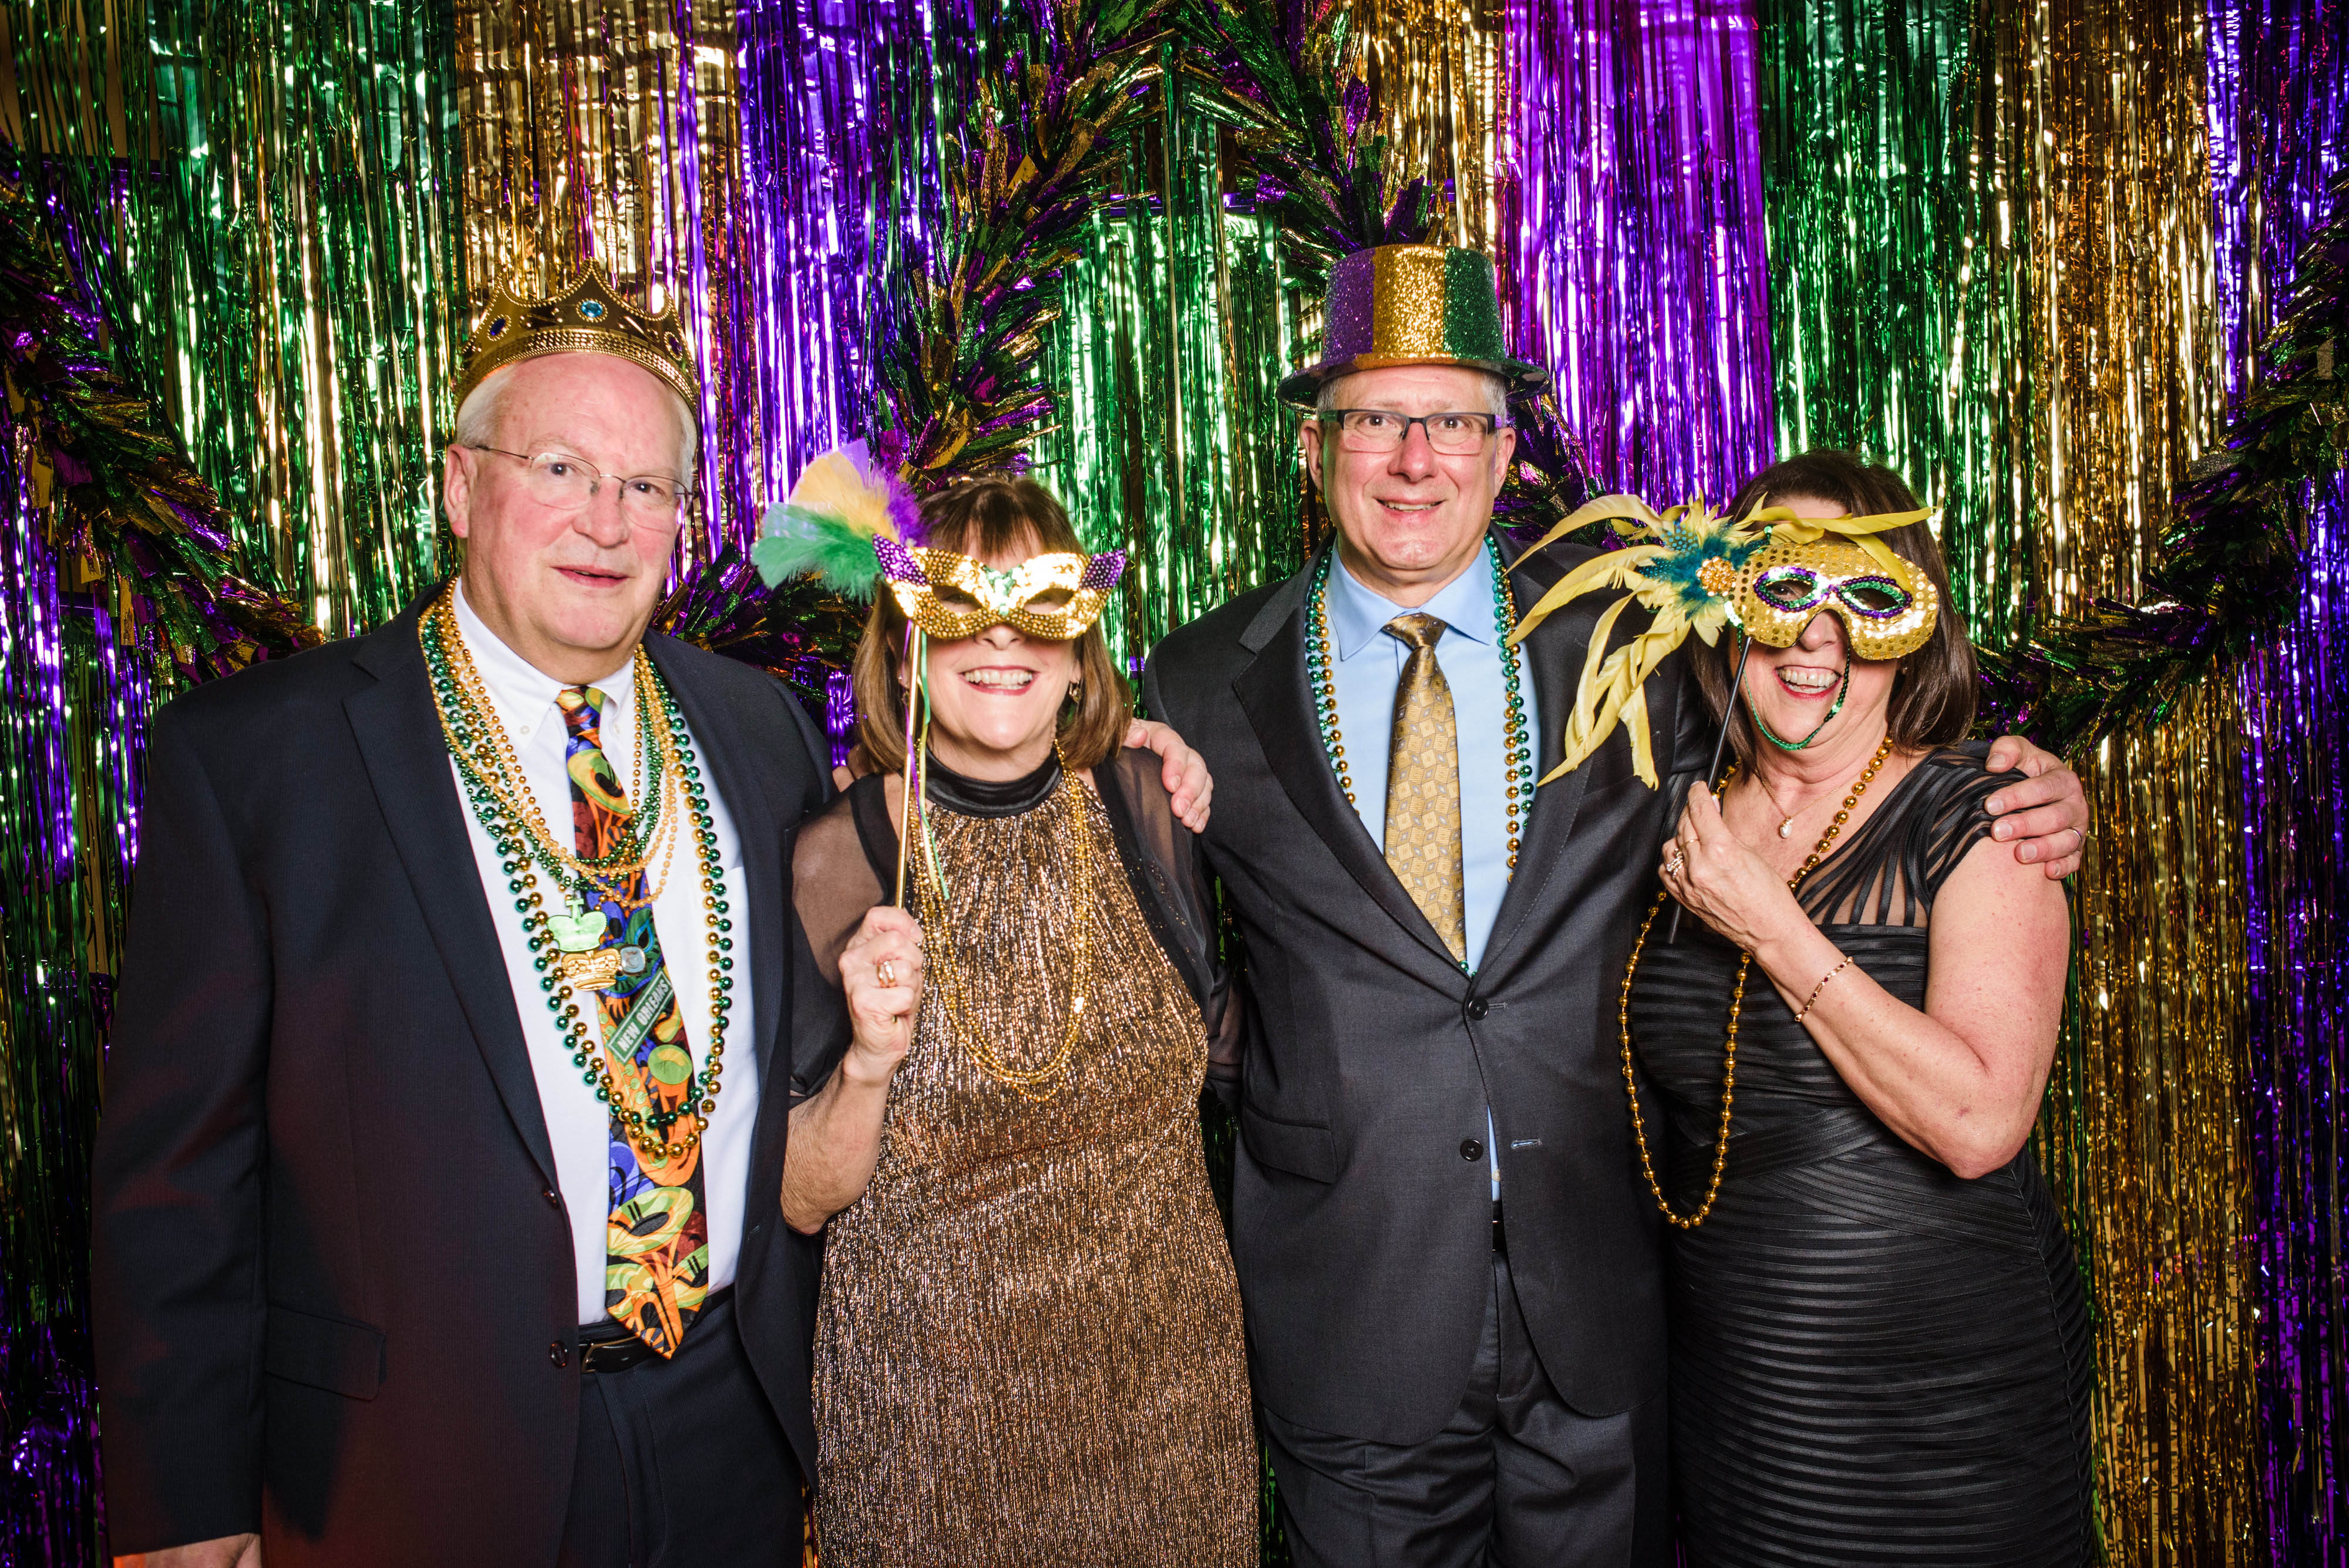 Two couples posing for photo at Mardi Gras event